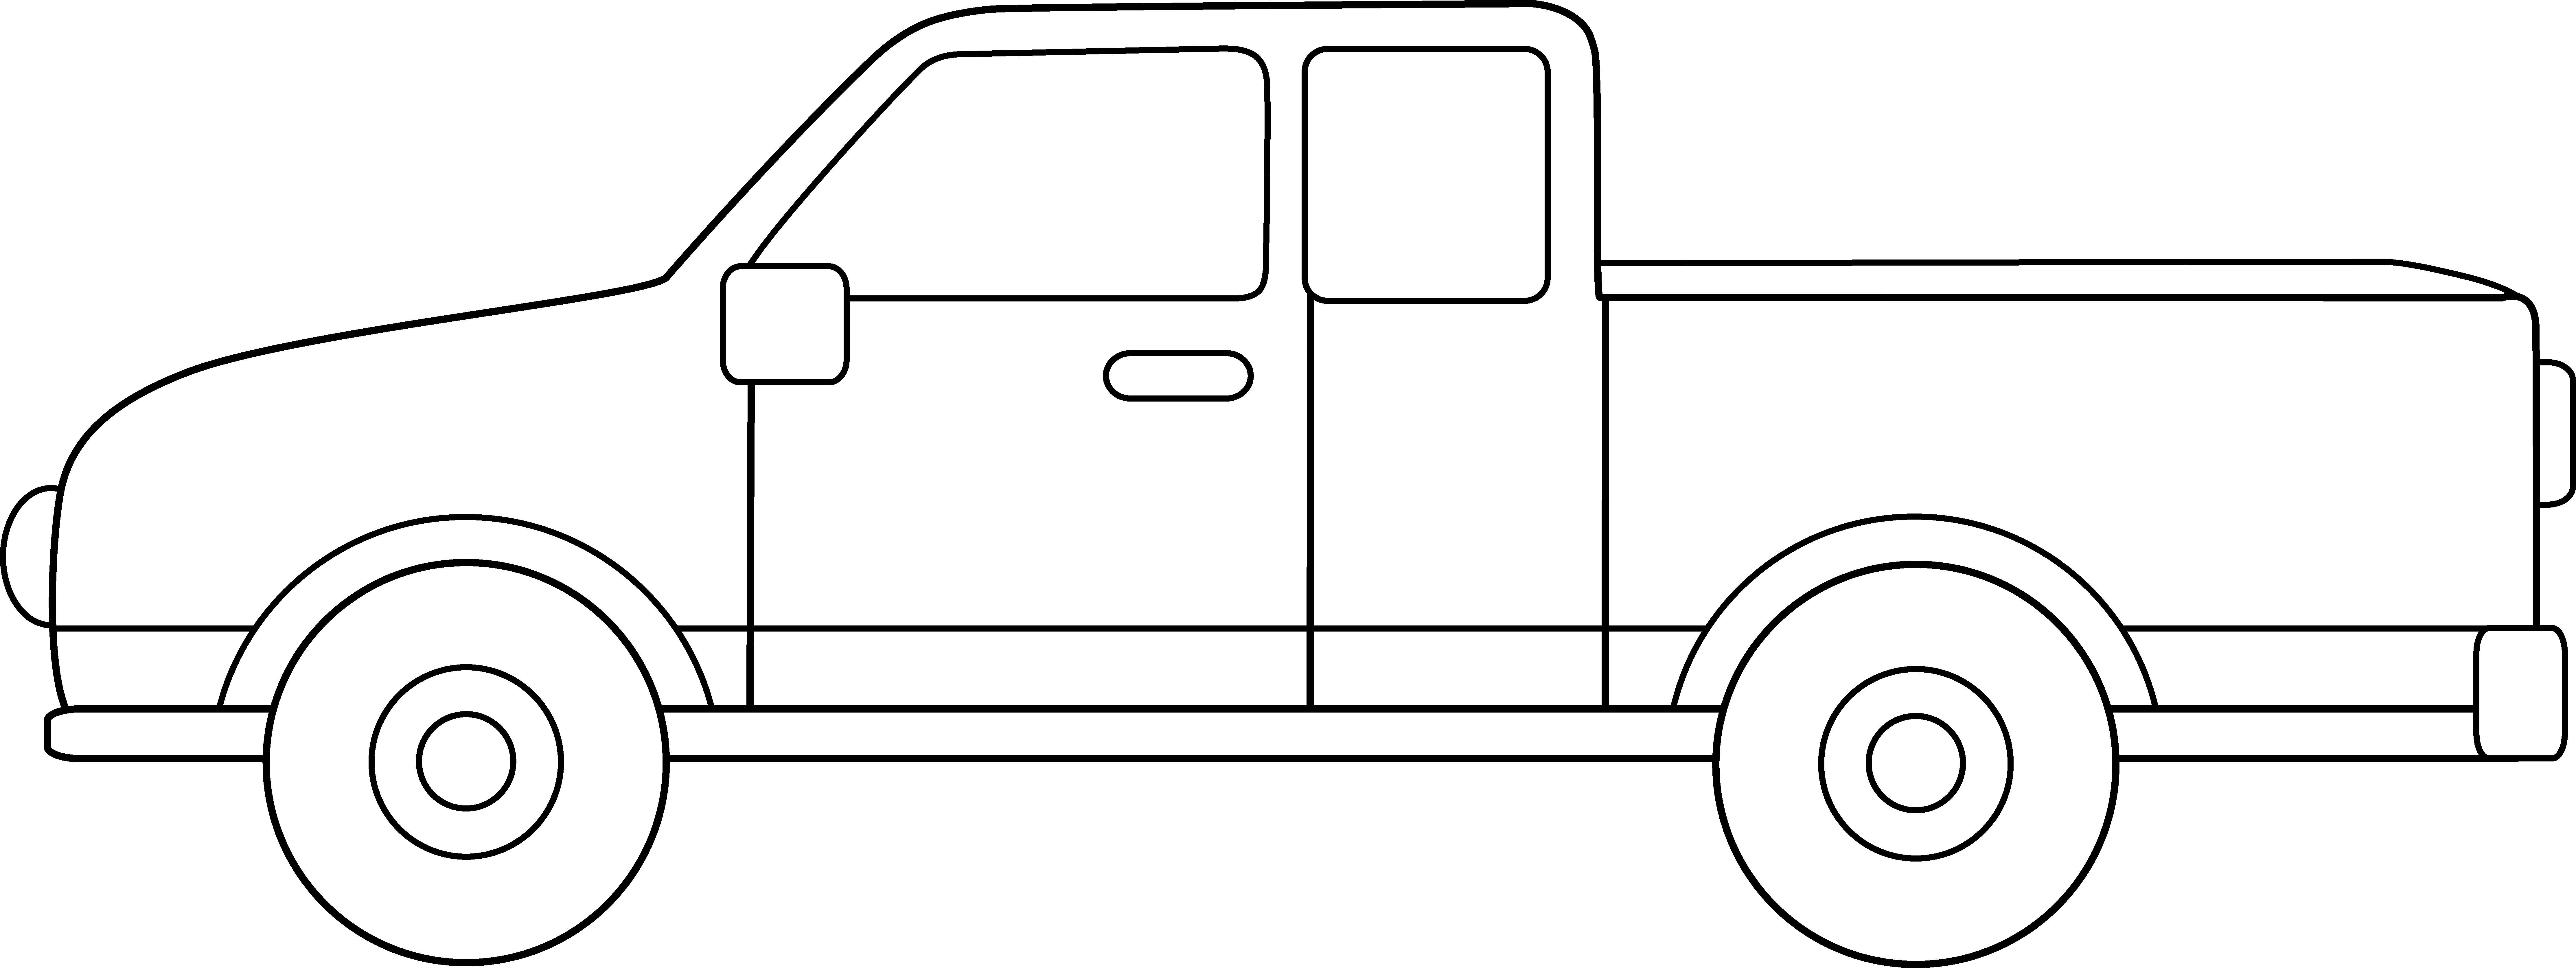 Clipart pickup ... Pickup Truck Coloring Page